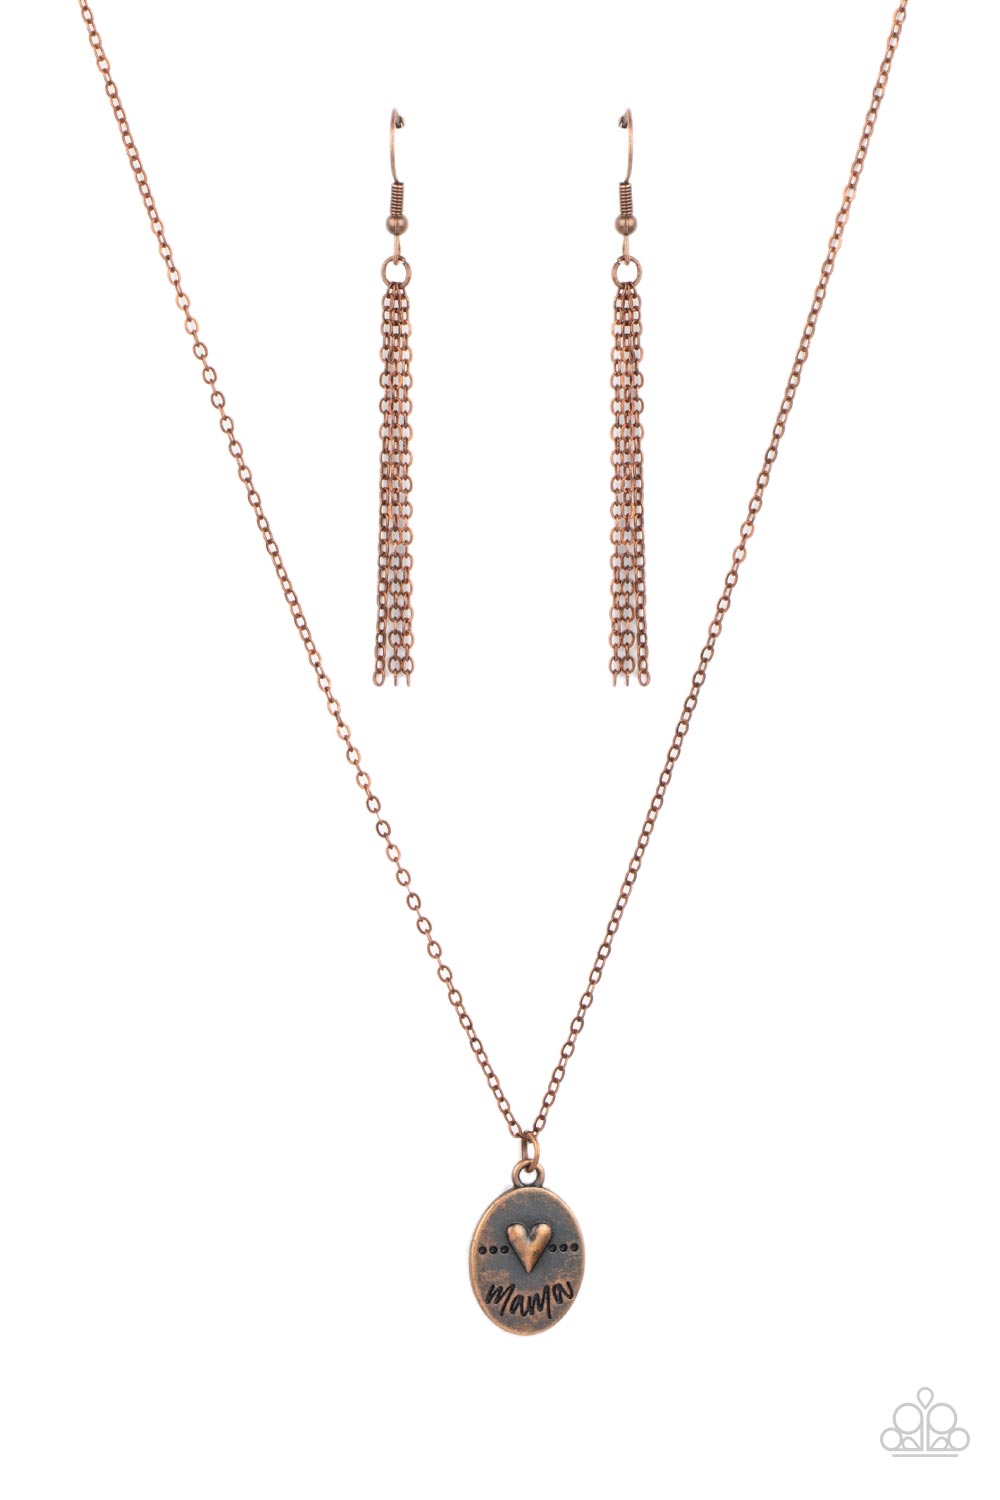 They Call Me Mama Paparazzi Accessories Necklace with Earrings - Copper